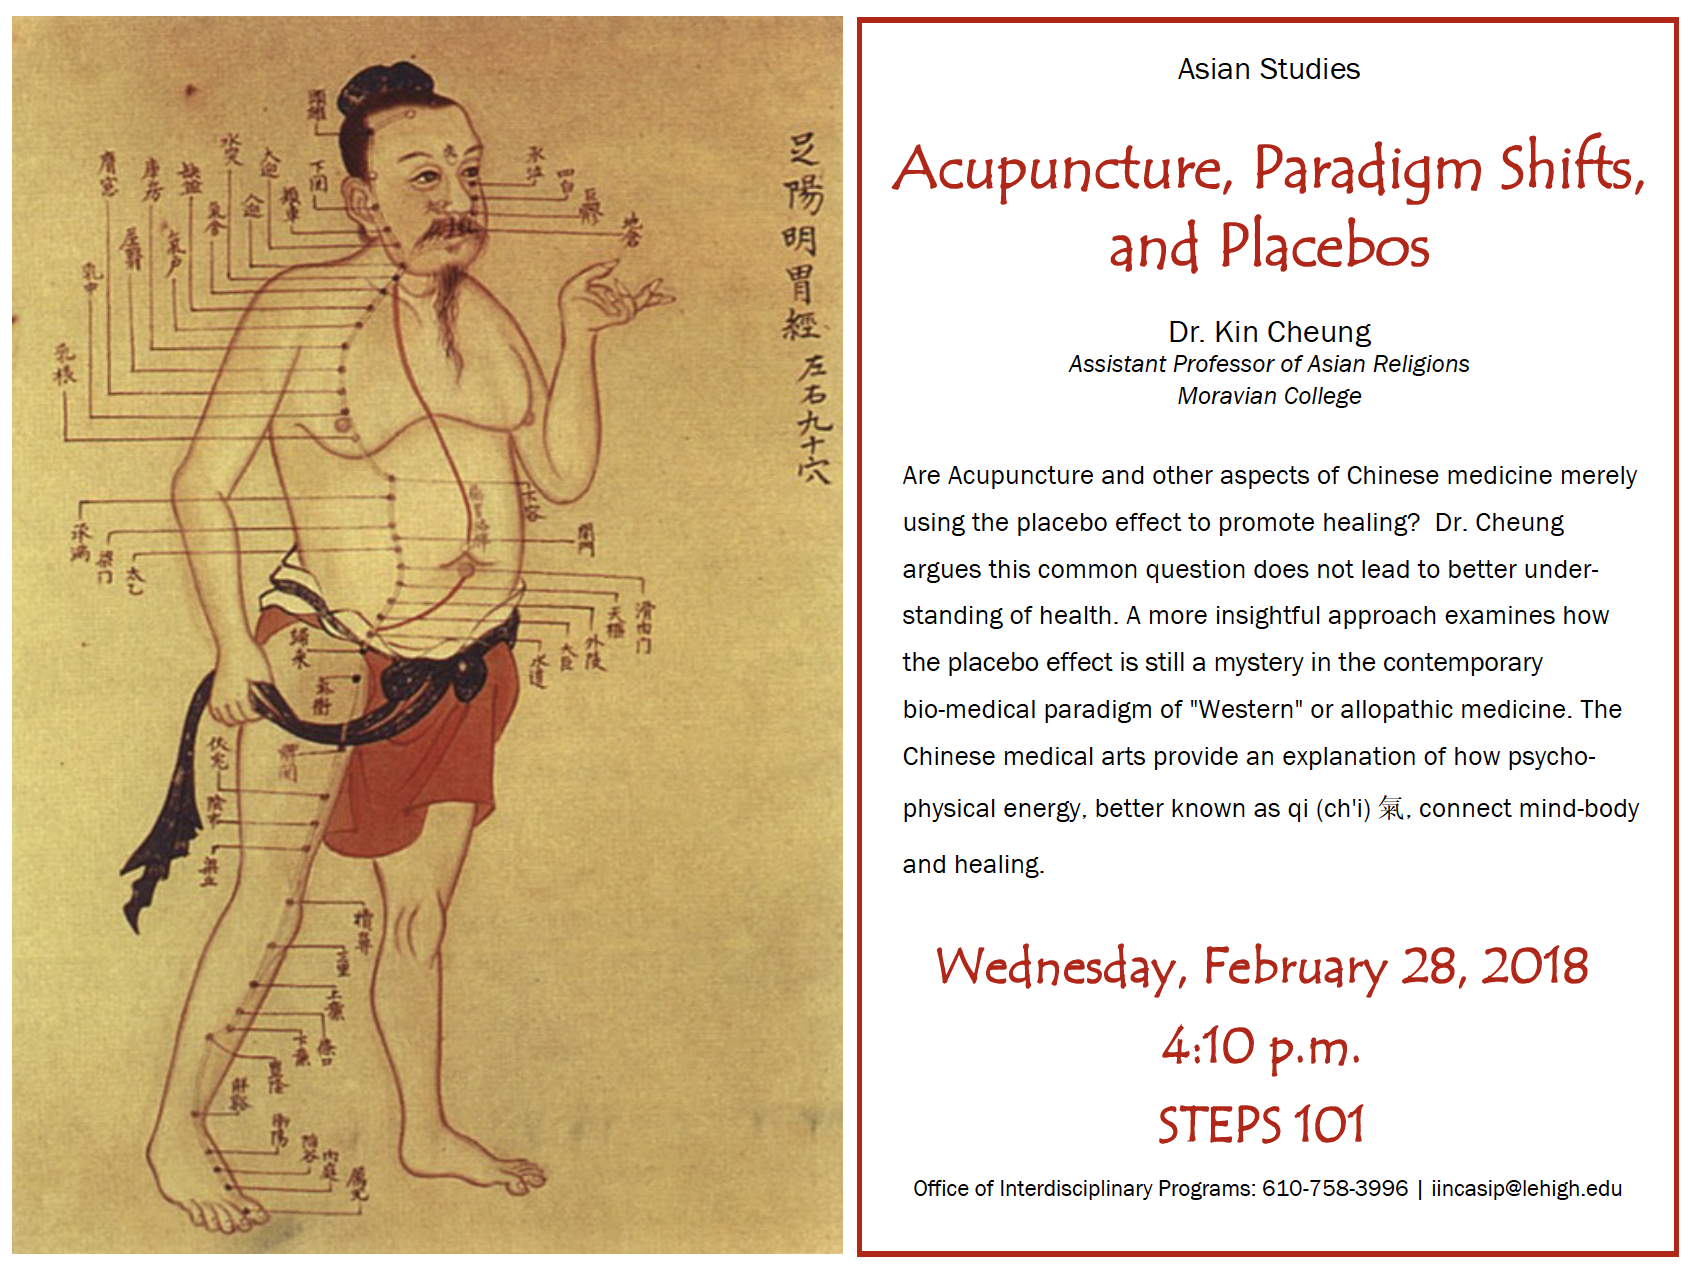 Acupuncture, Paradigm Shifts and Placebos Flyers